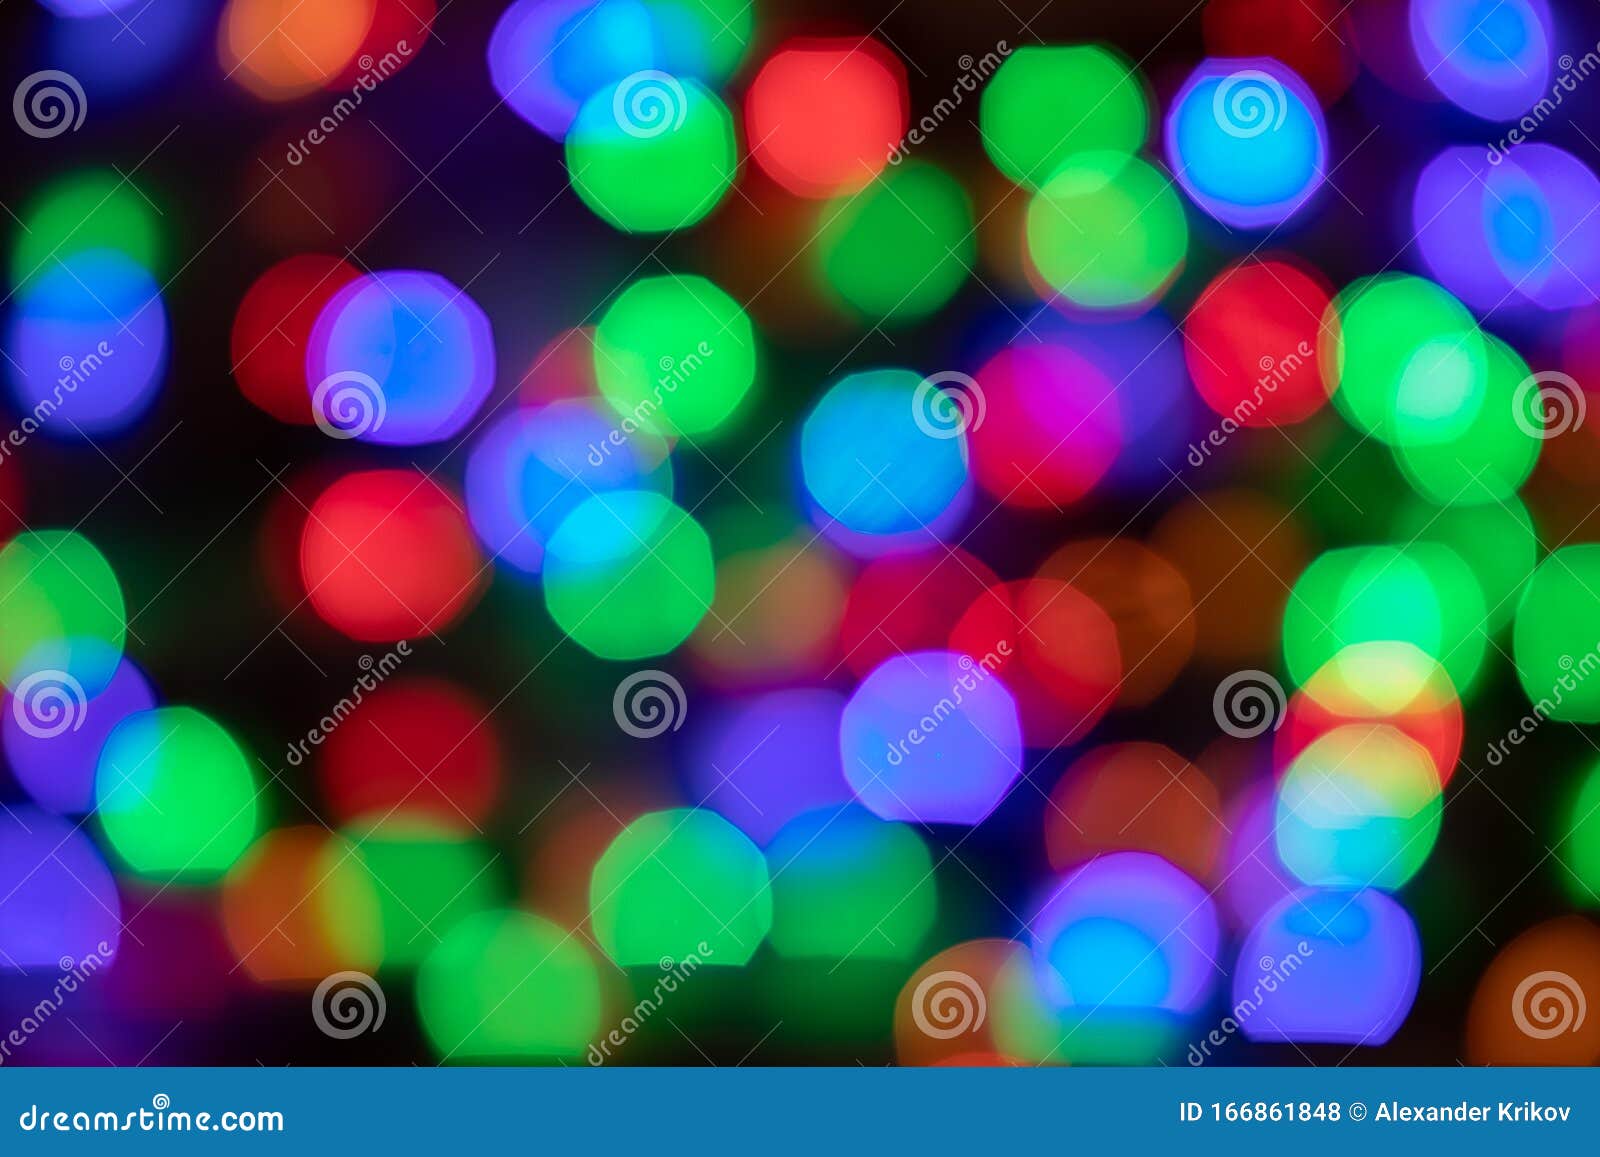 884 Led Spots Photos - Free & Royalty-Free Stock Photos from Dreamstime